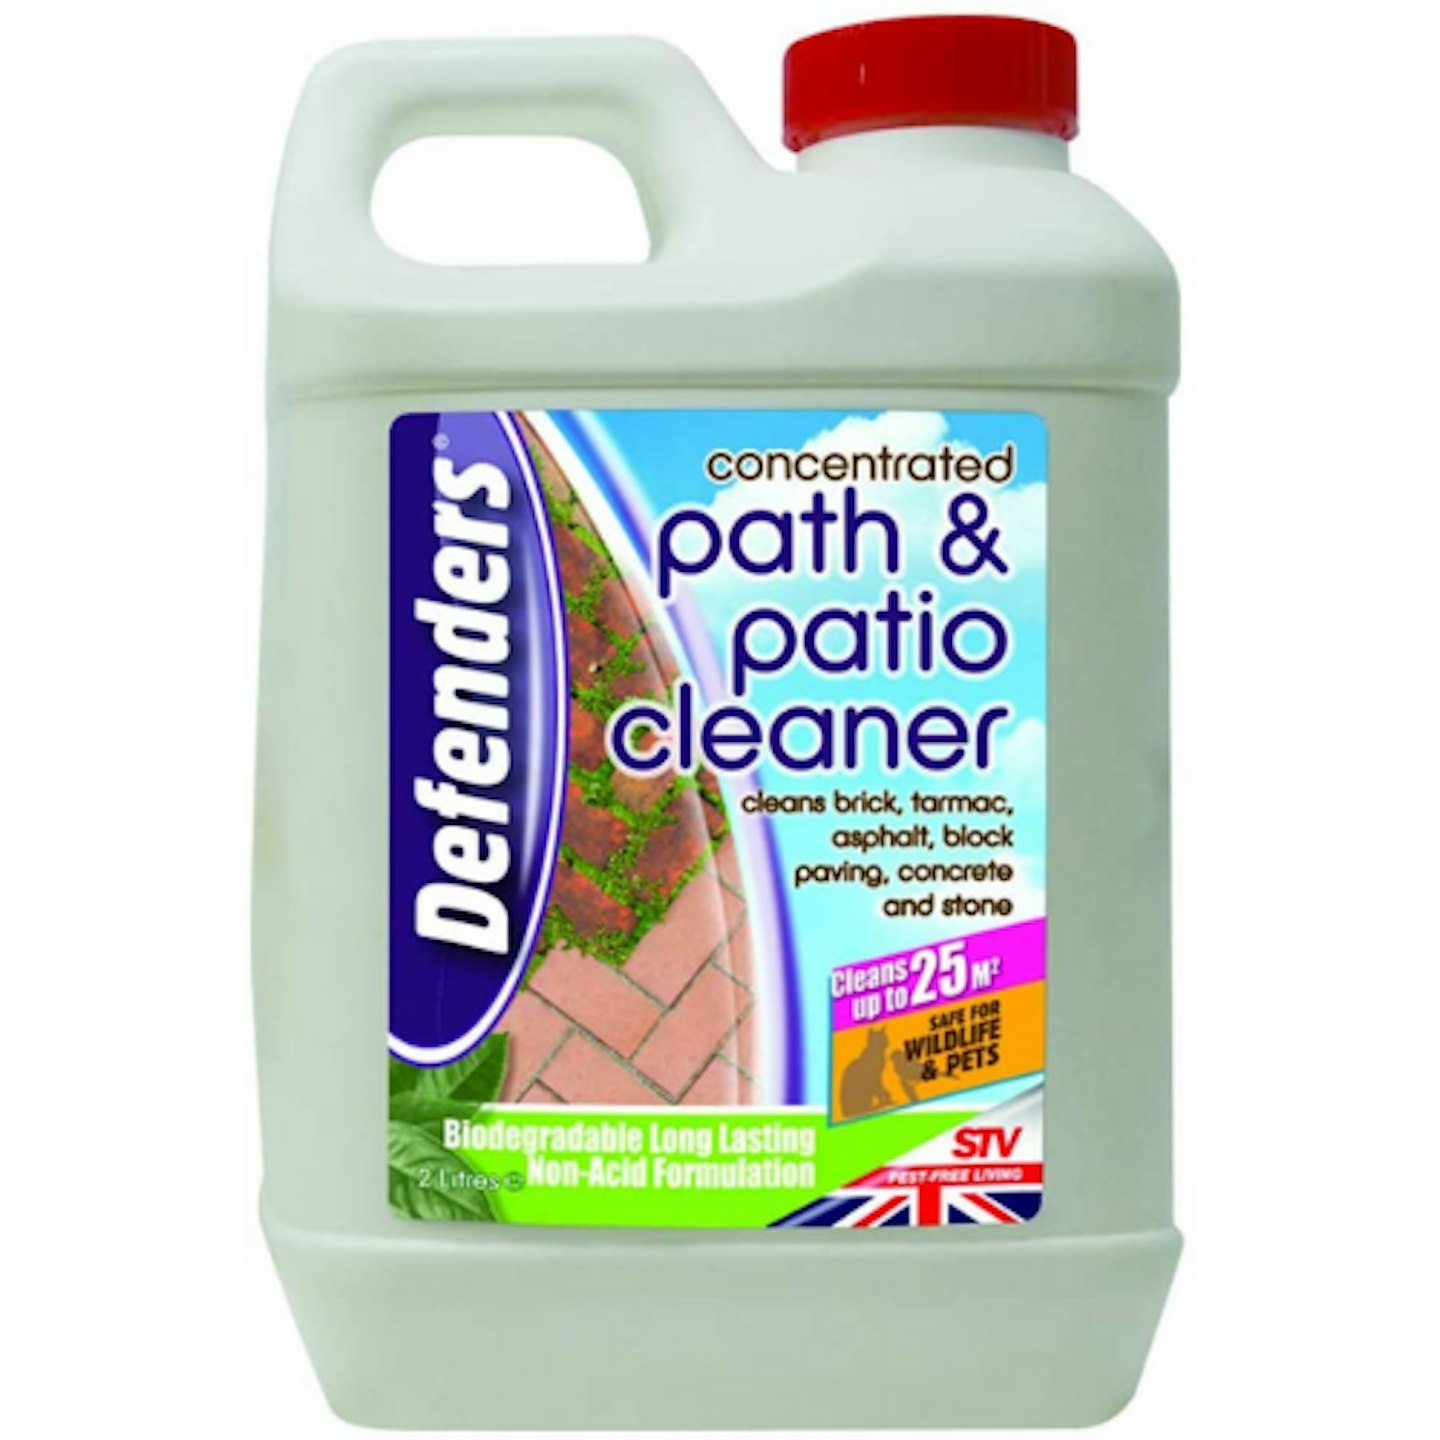 Defenders STV940 Concentrated Path and Patio Cleaner